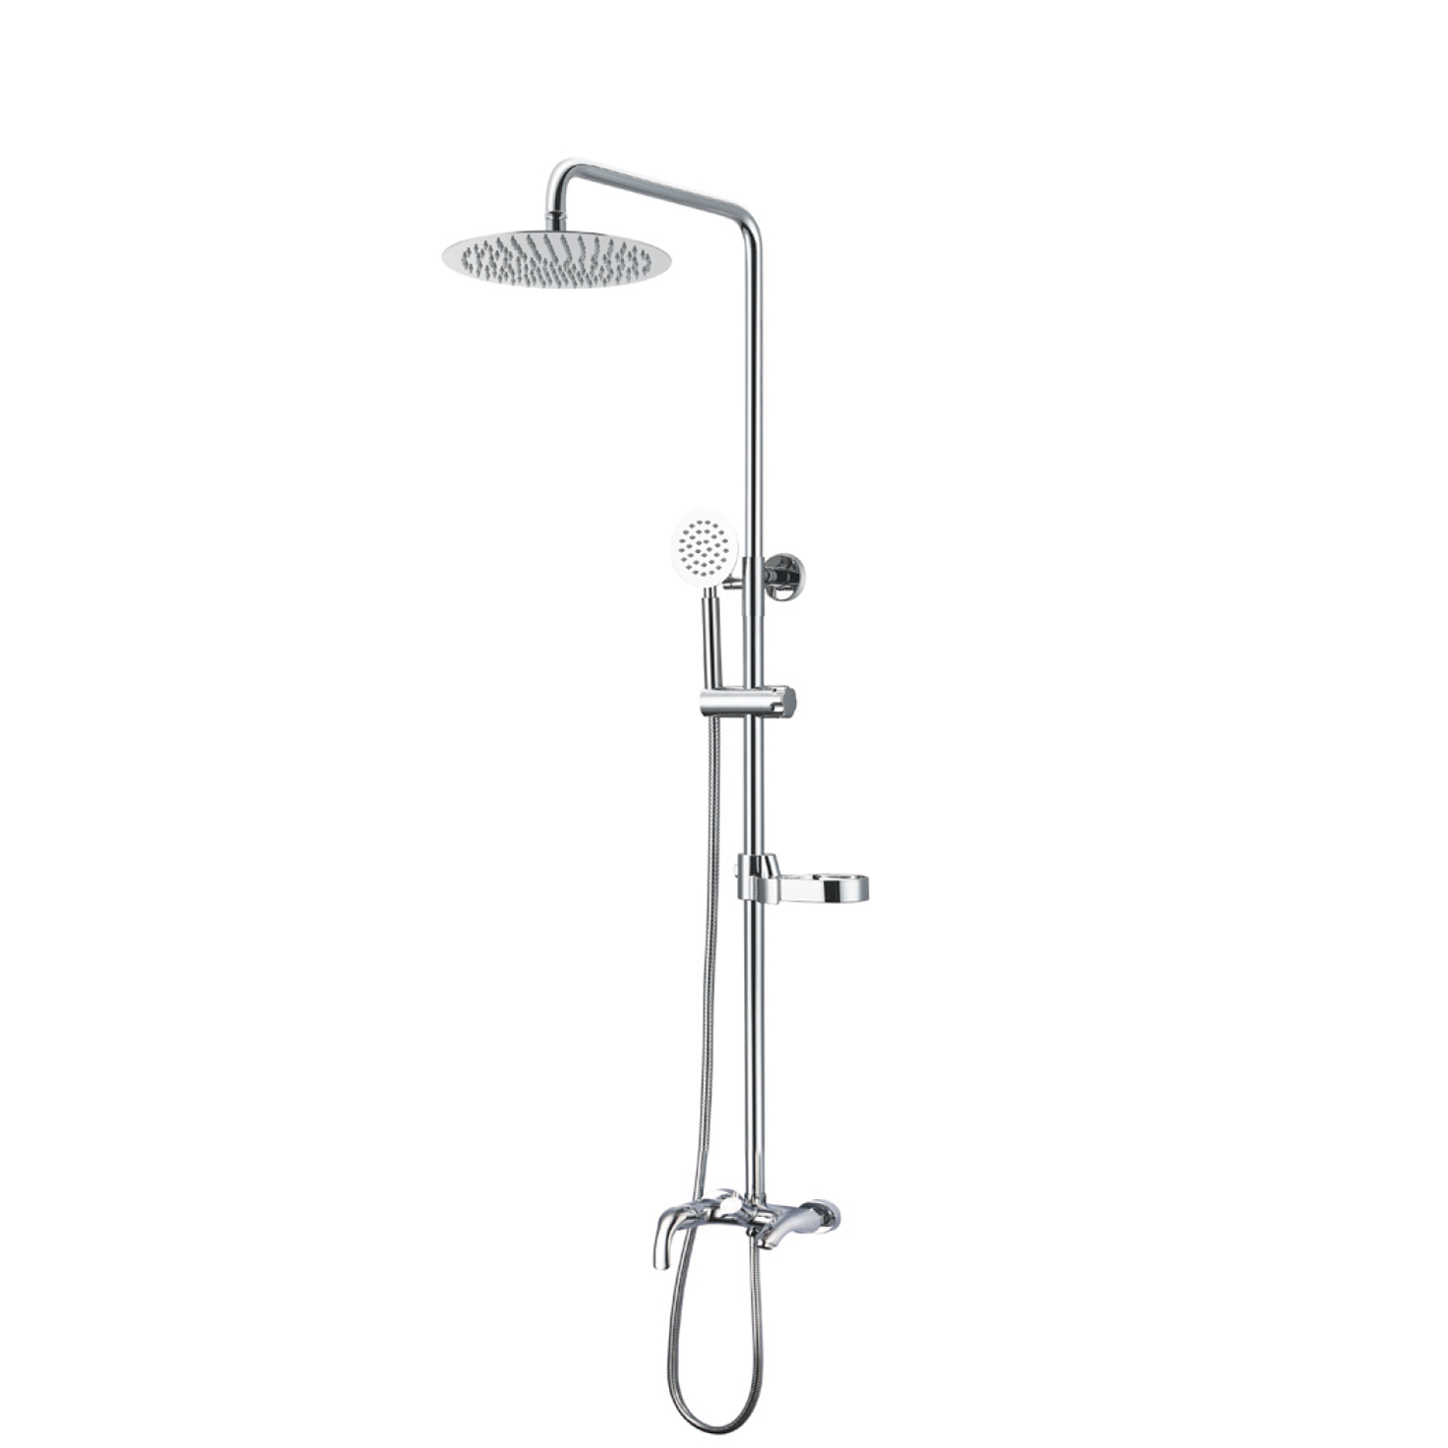 Round and round shower with stainless steel spout